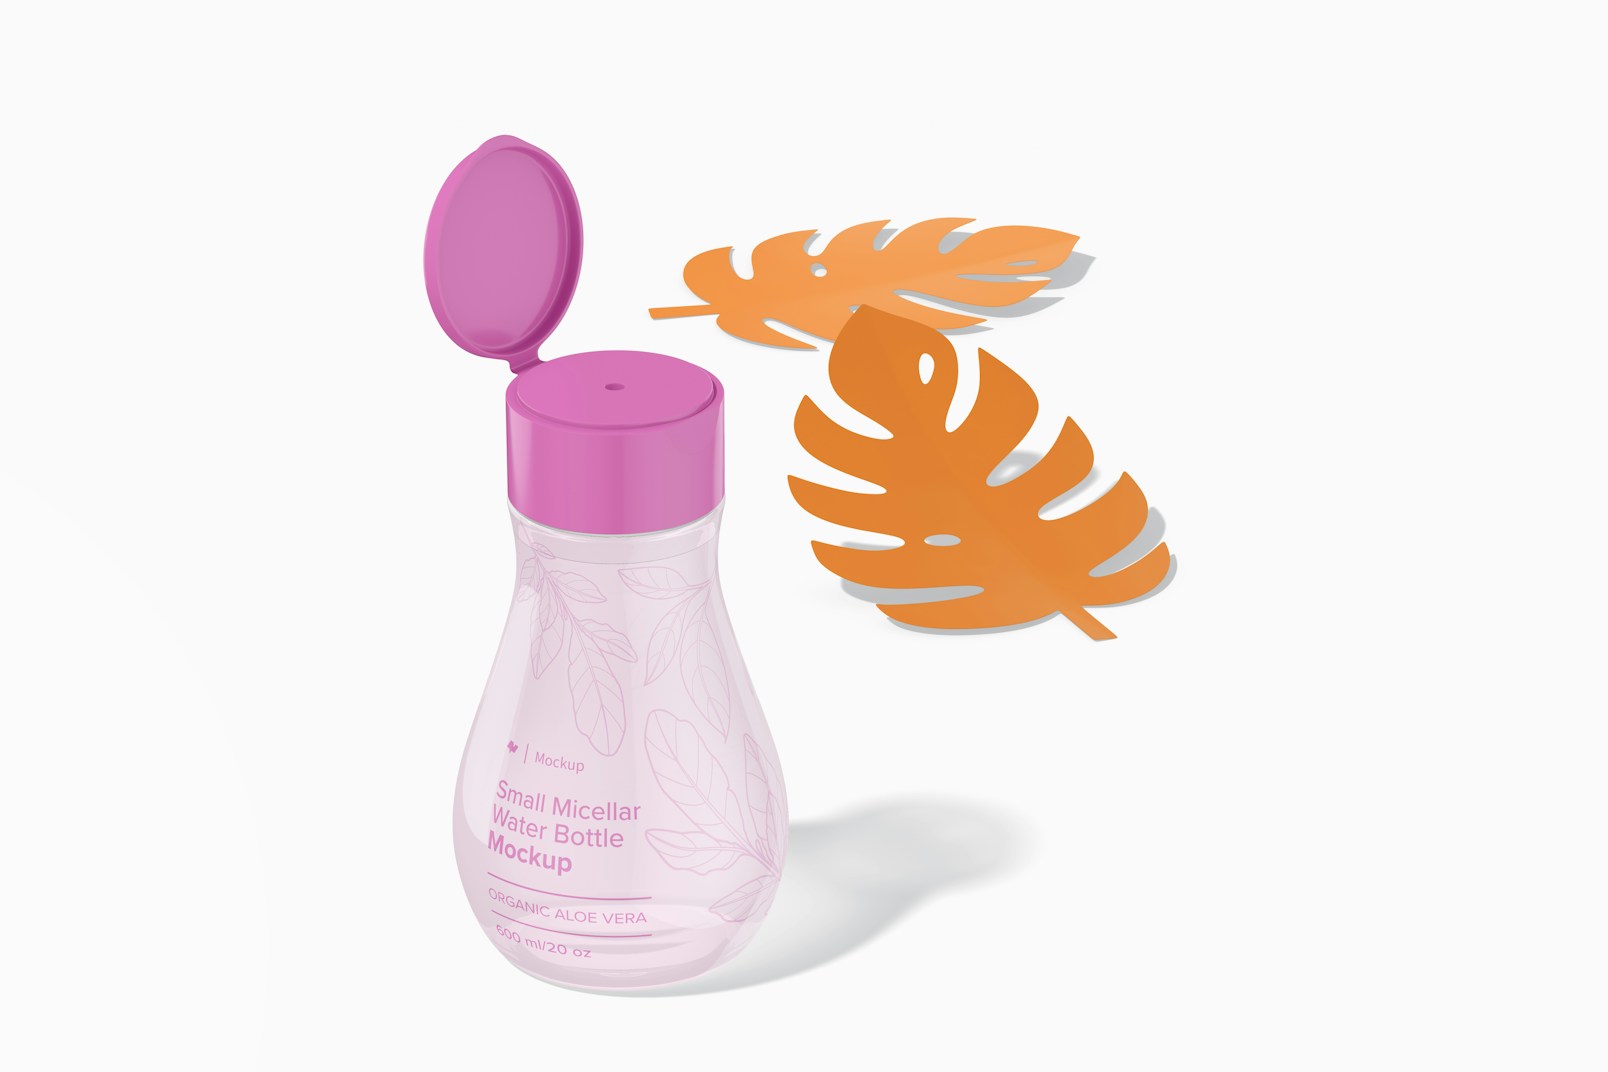 Small Micellar Water Bottle Mockup, Perspective